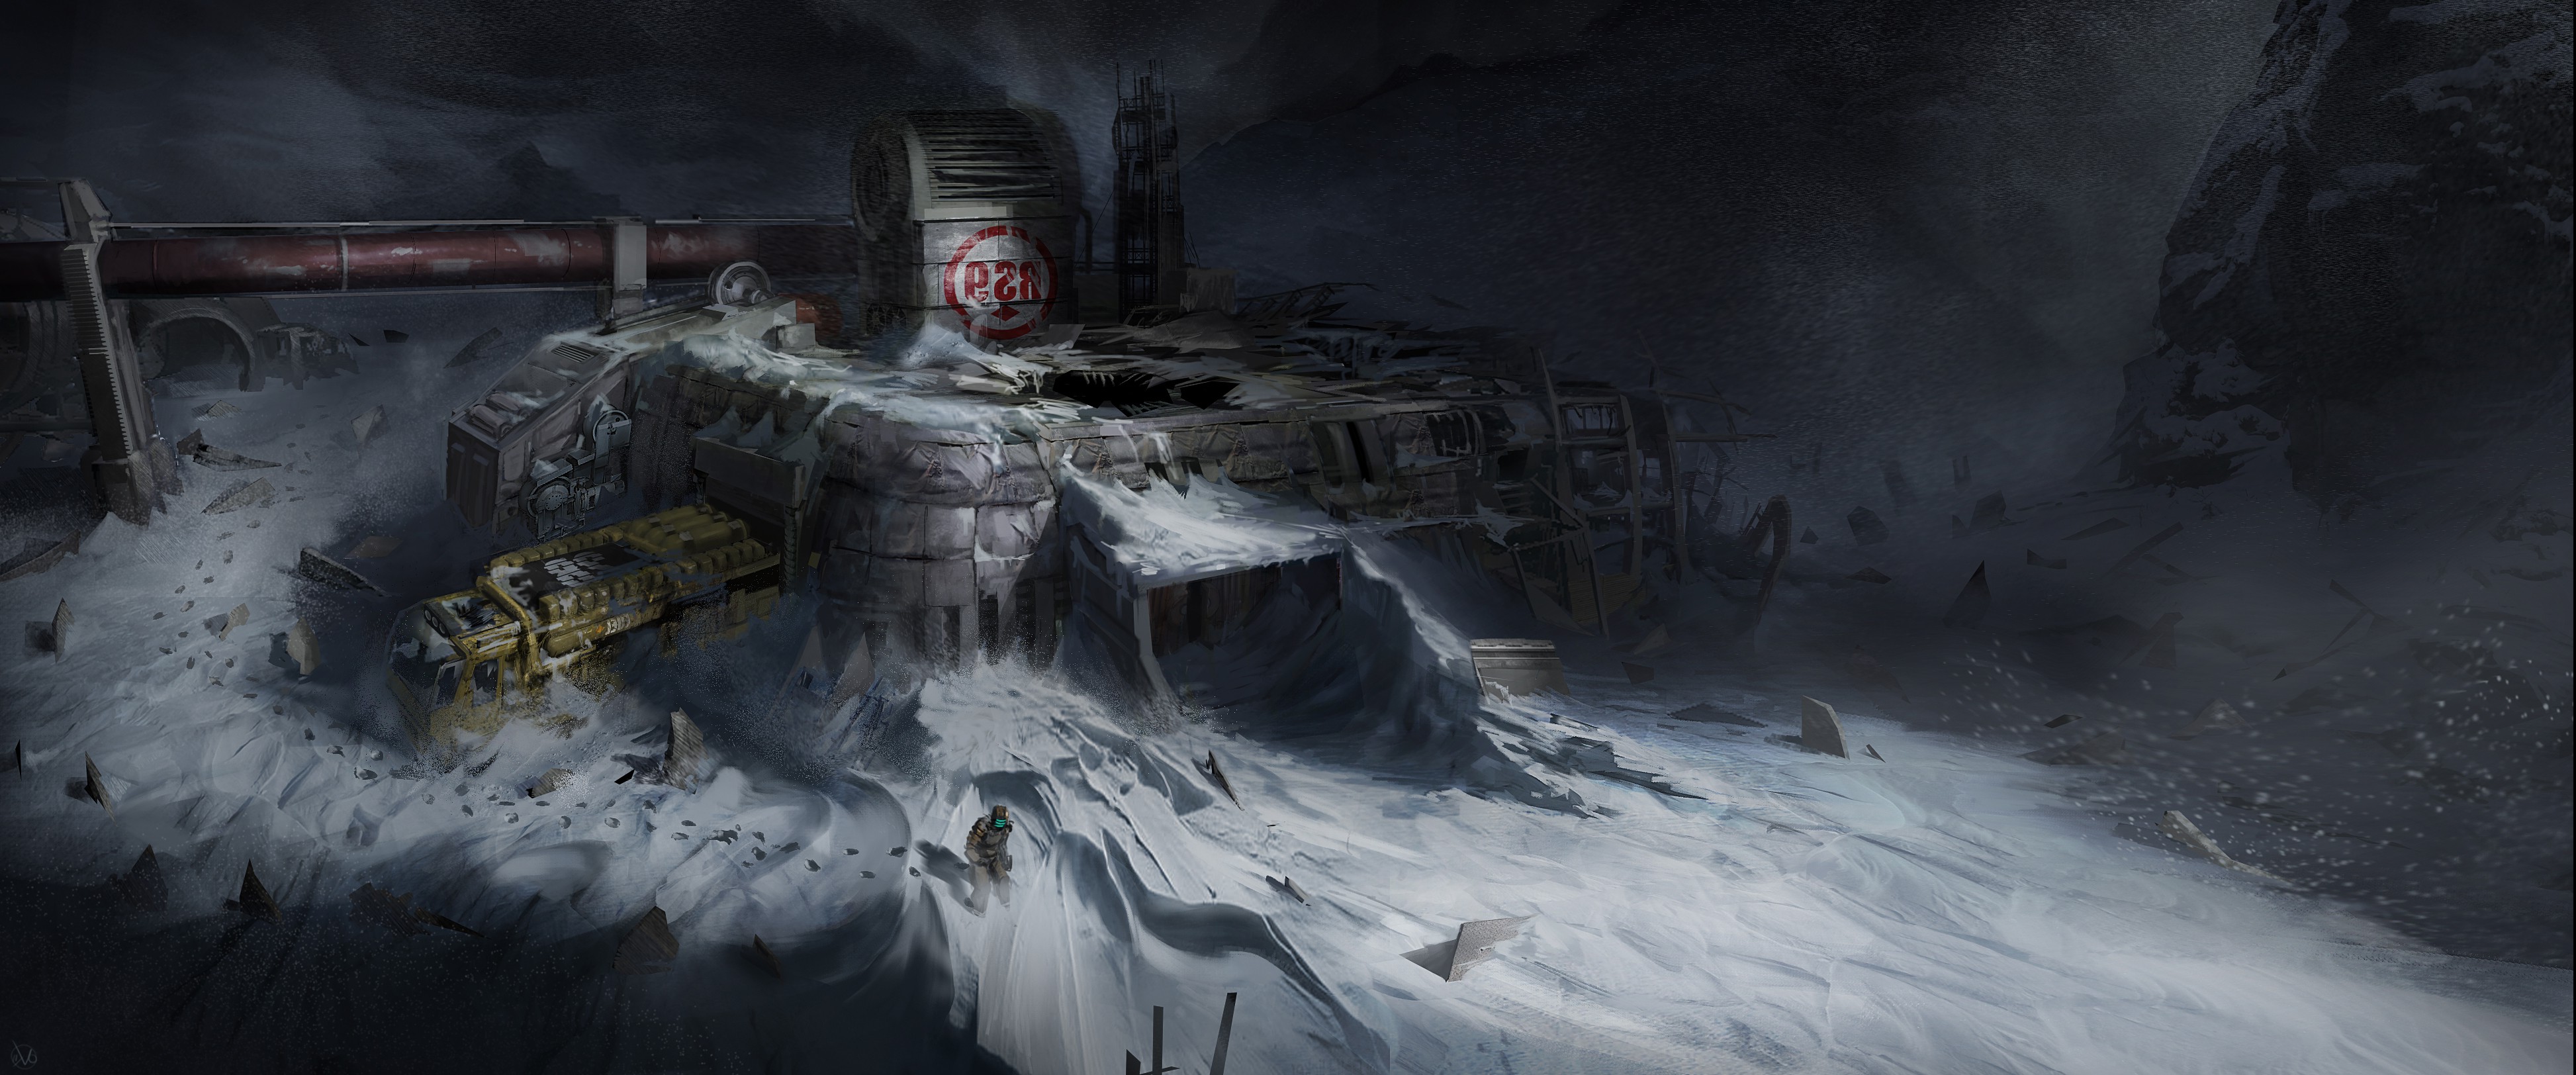 abandoned, Snow, Science Fiction, Dead Space Wallpaper